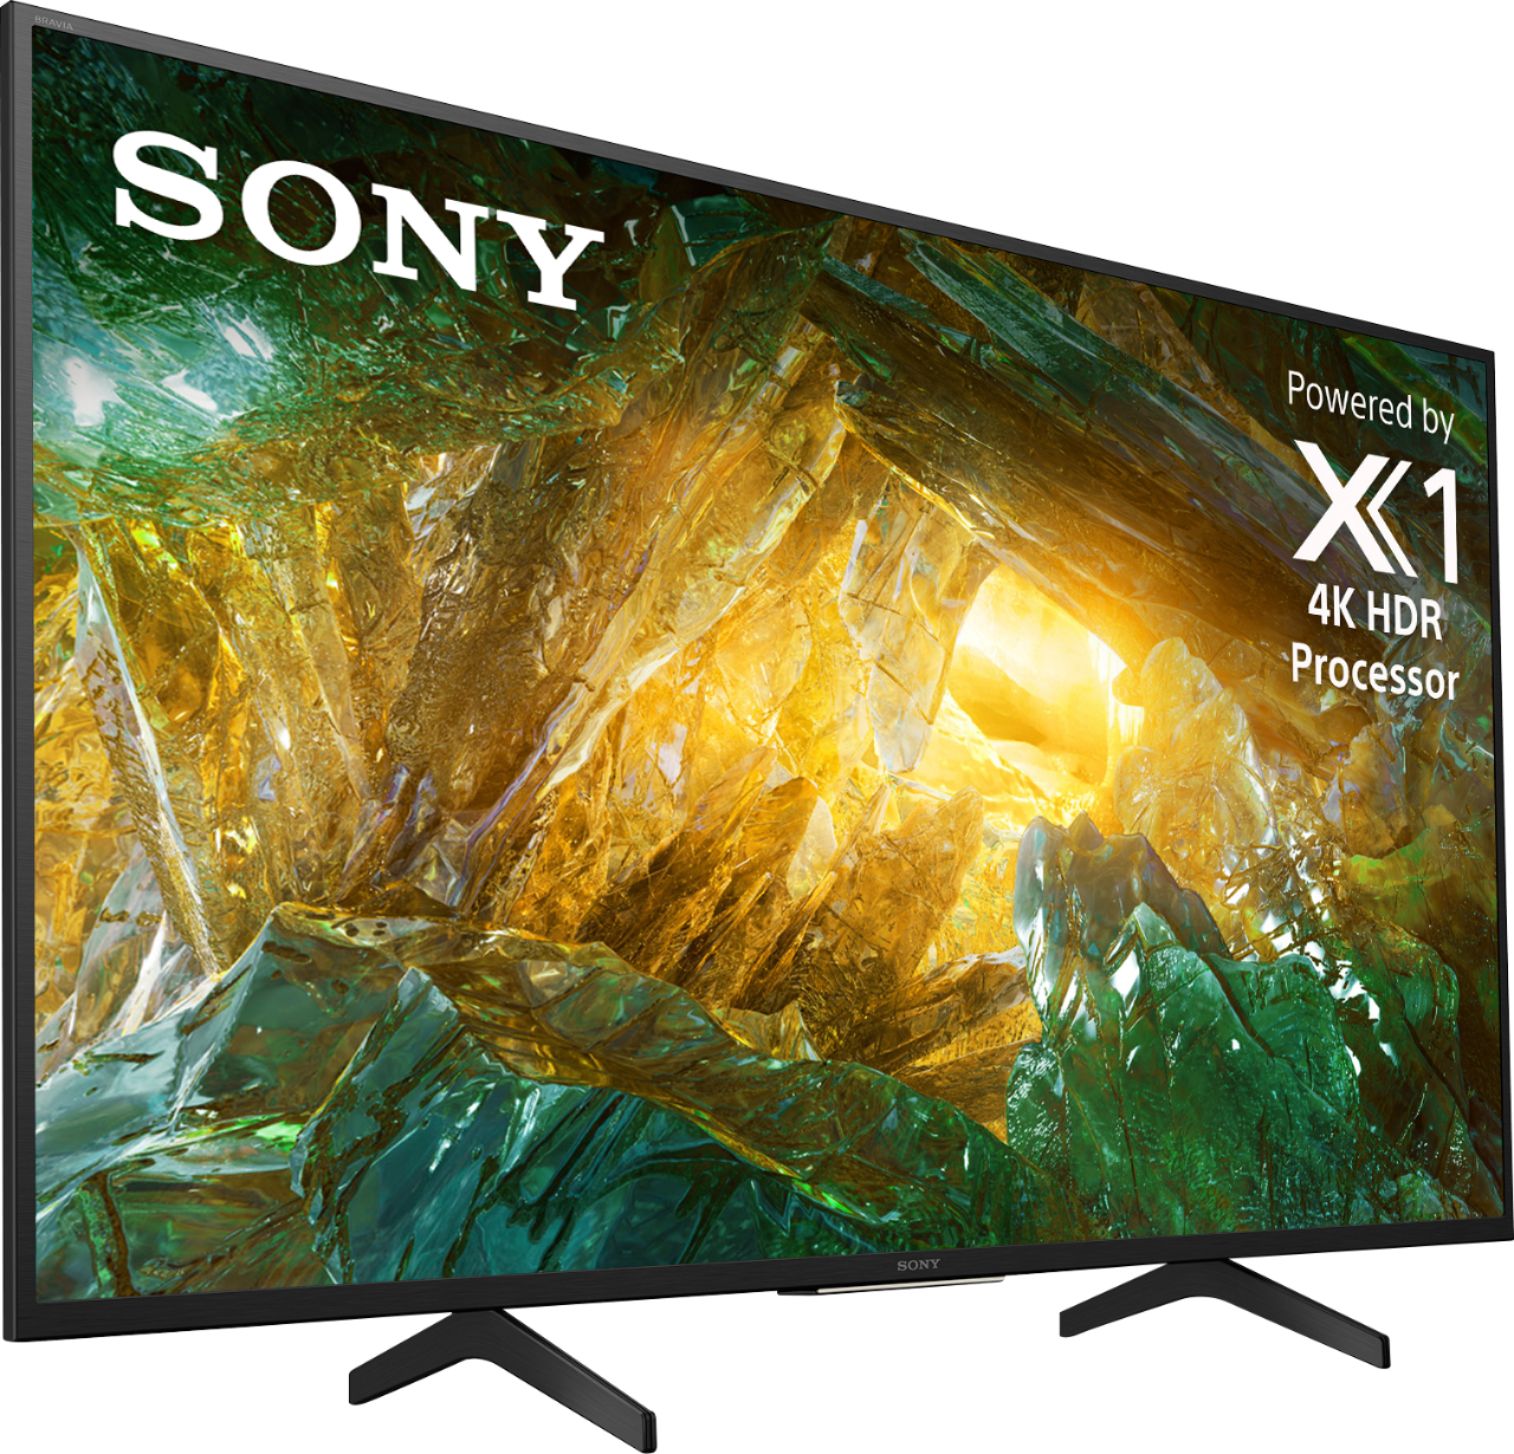 Angle View: Sony - 49" Class X800H Series LED 4K UHD Smart Android TV